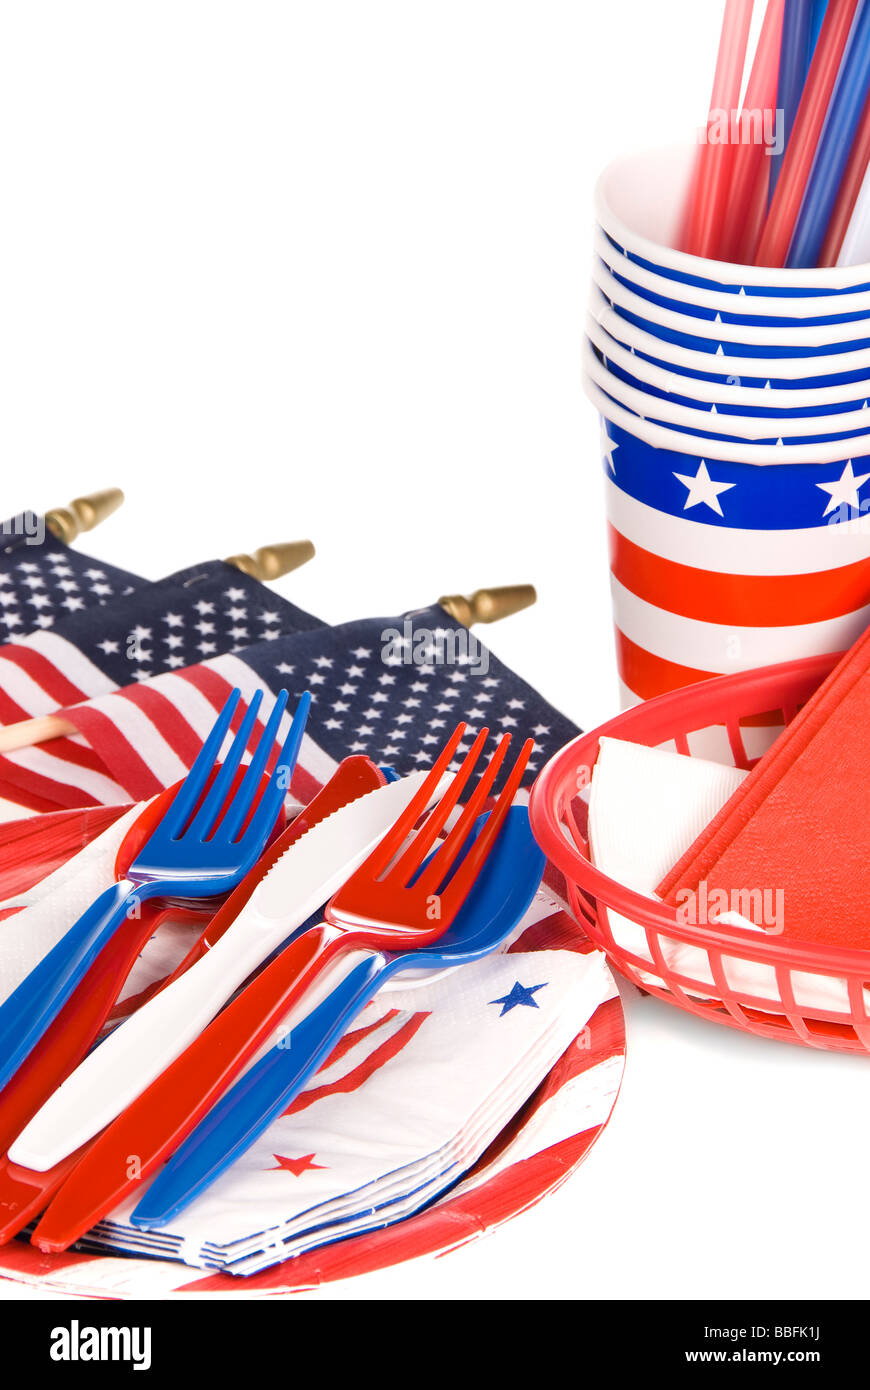 July fourth patriotic utensils including plastic forks knives spoons napkins plates and cups on a white background Stock Photo